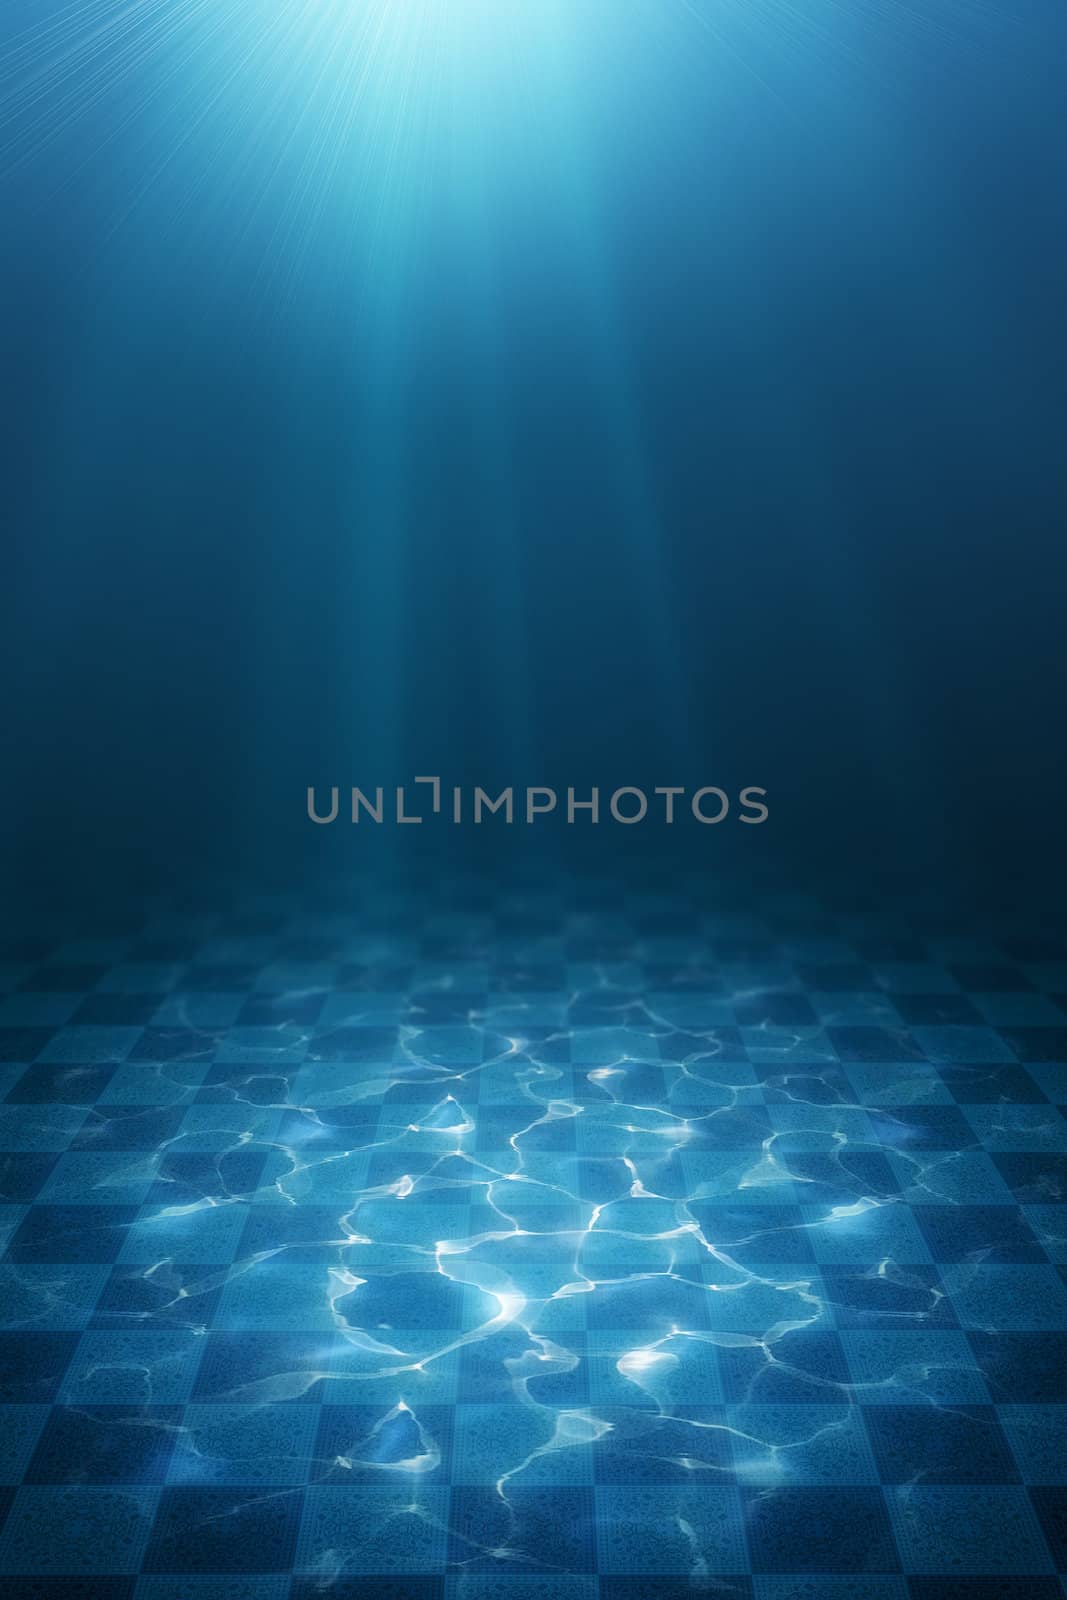 An illustration of a nice under water background